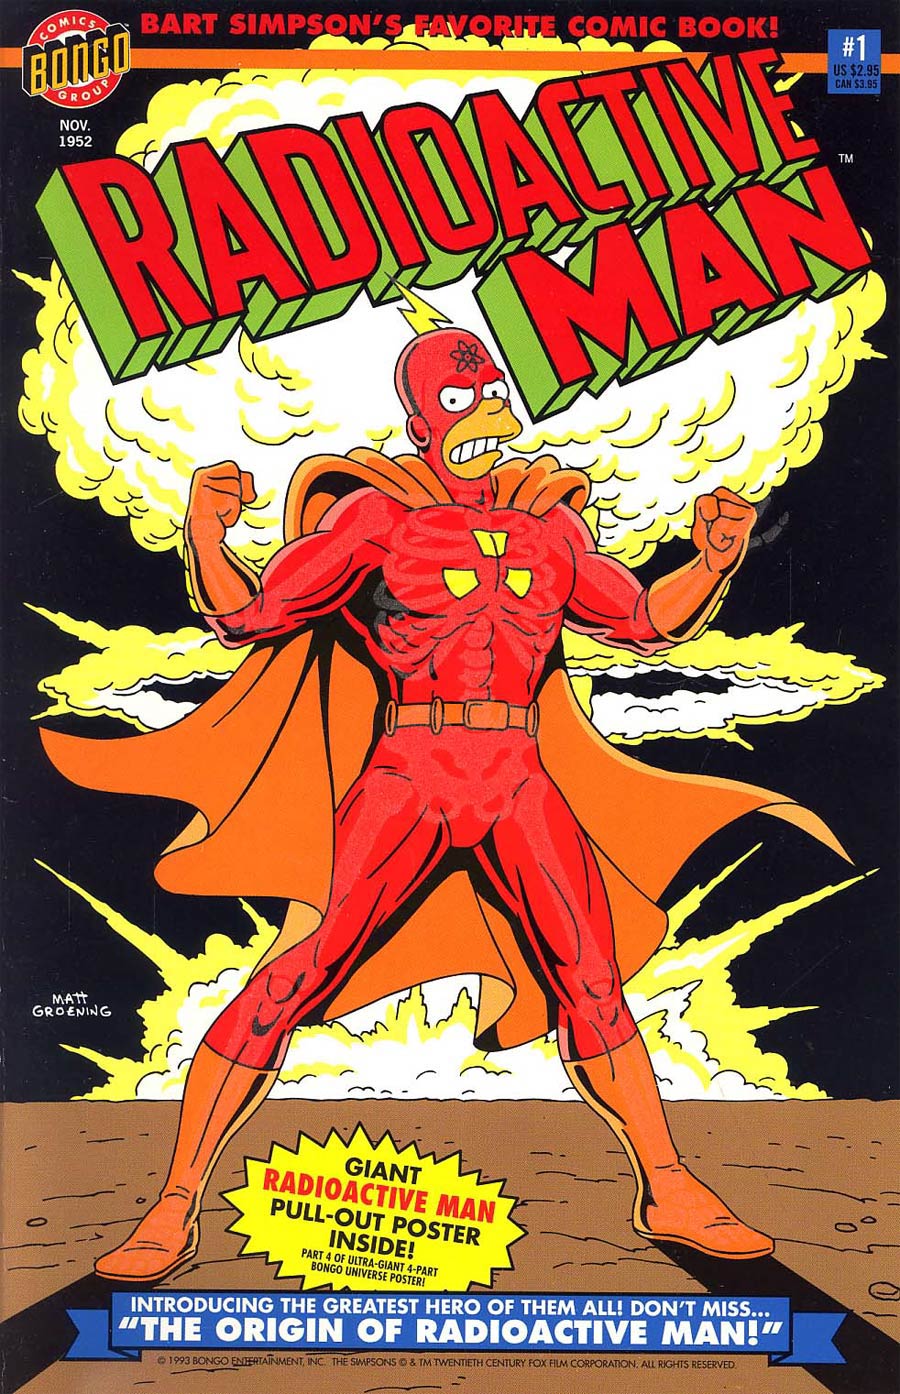 Radioactive Man #1 Cover A With Poster